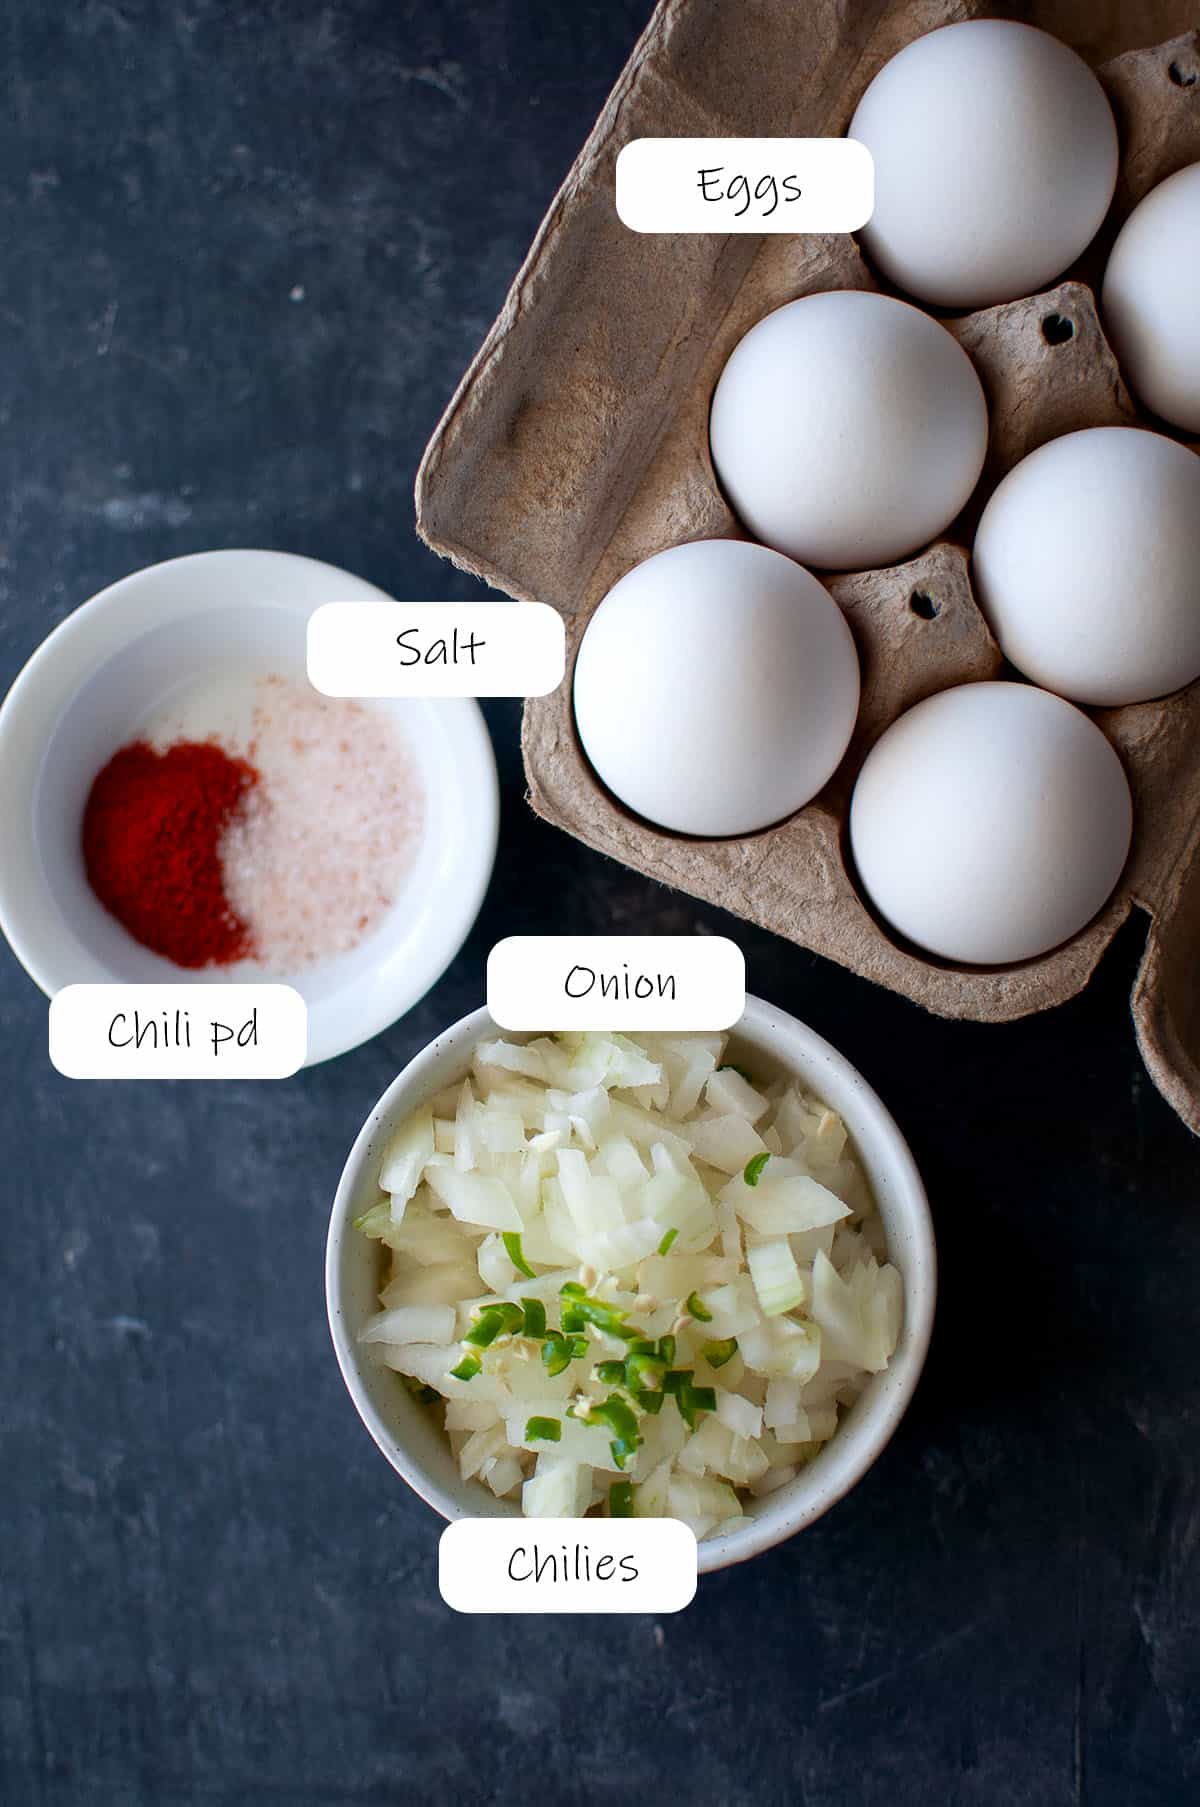 Ingredients to make omelette - details in recipe card.